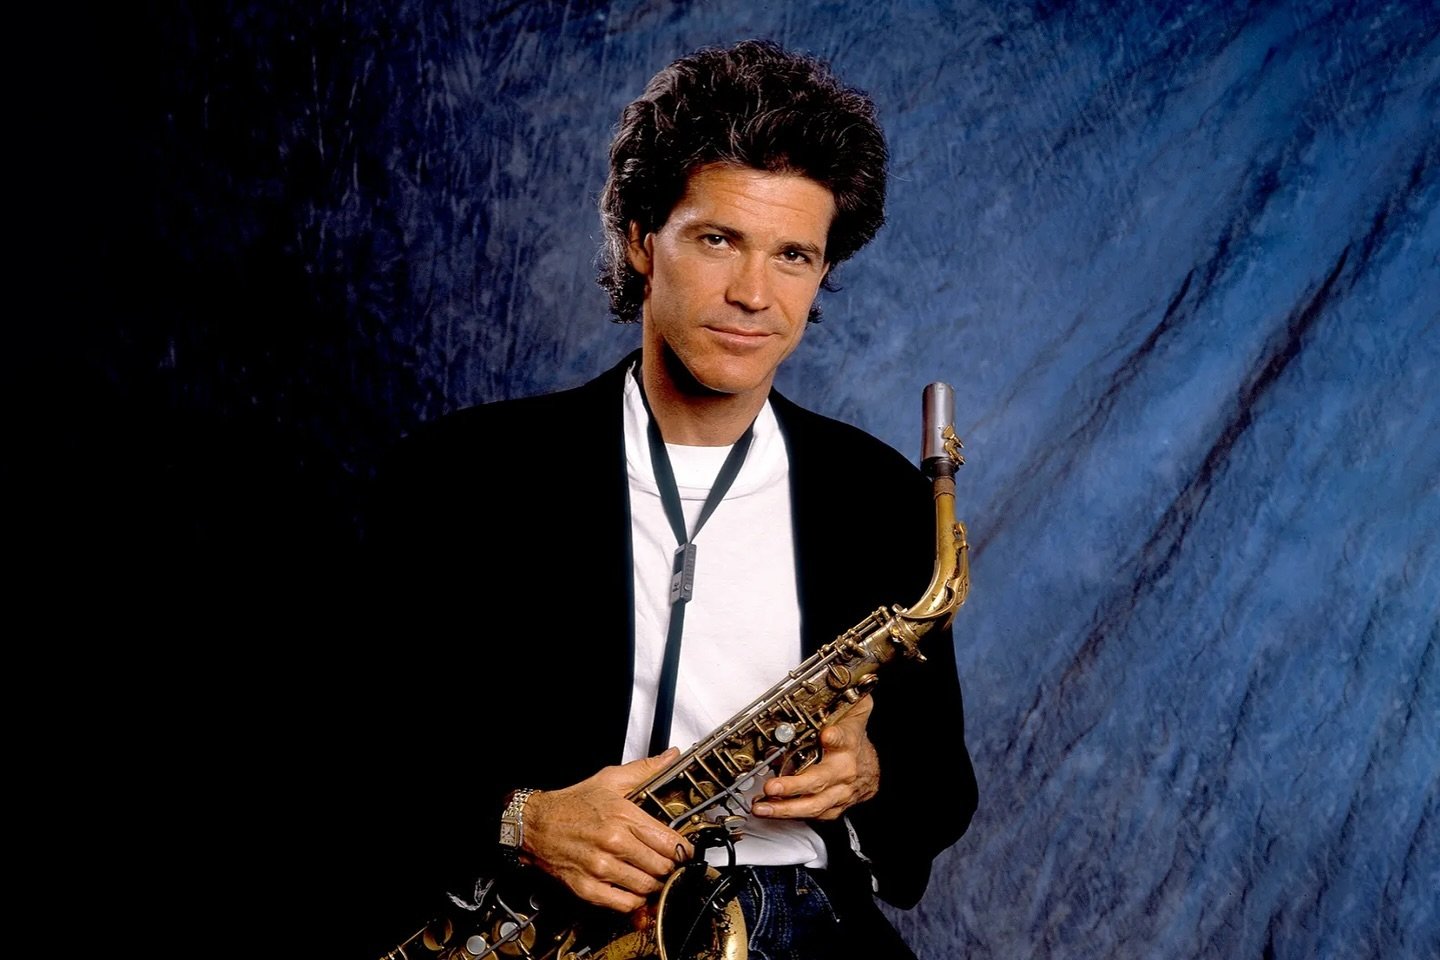 &ldquo;When you&rsquo;re on stage, unless you surrender to the moment, you&rsquo;re not telling the truth. I look for people that tell me the truth.&rdquo; David Sanborn

Thank you for always telling the truth by your music. 
Straight to the heart. 
